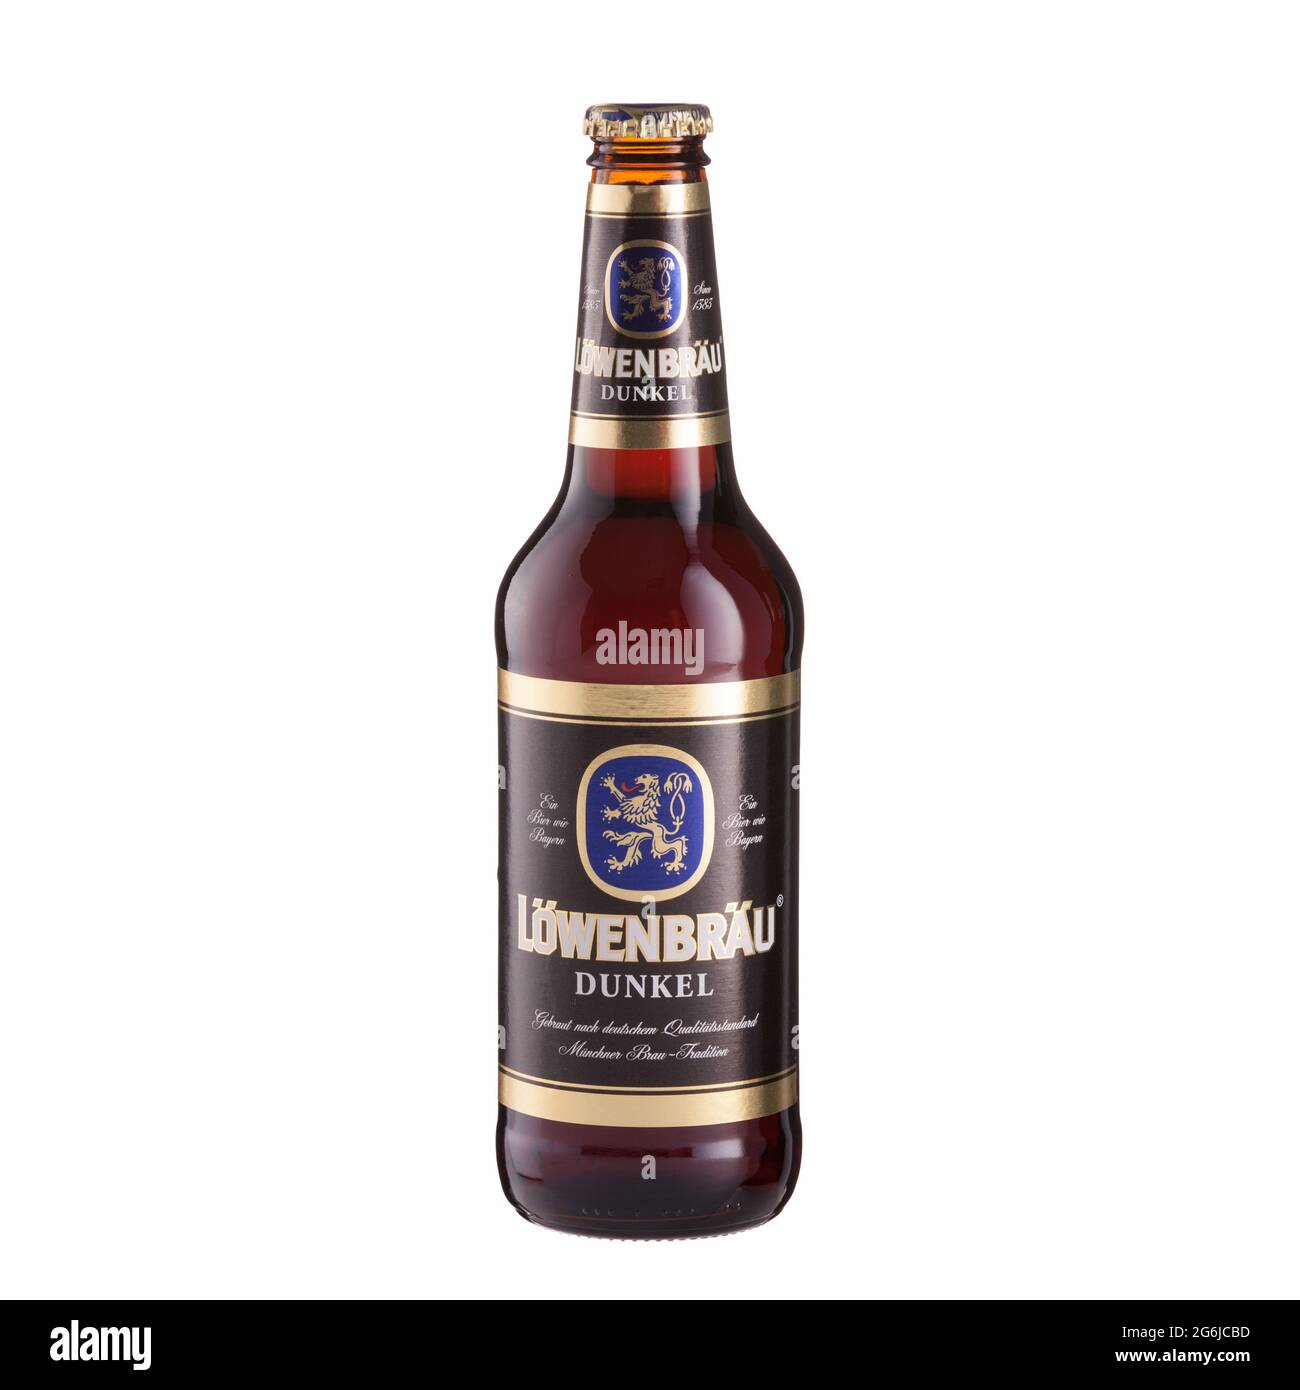 Lowenbrau Dunkel. Dark beer bottle on glass table isolated against white background - Volgograd, Russia - June 03, 2021. Stock Photo